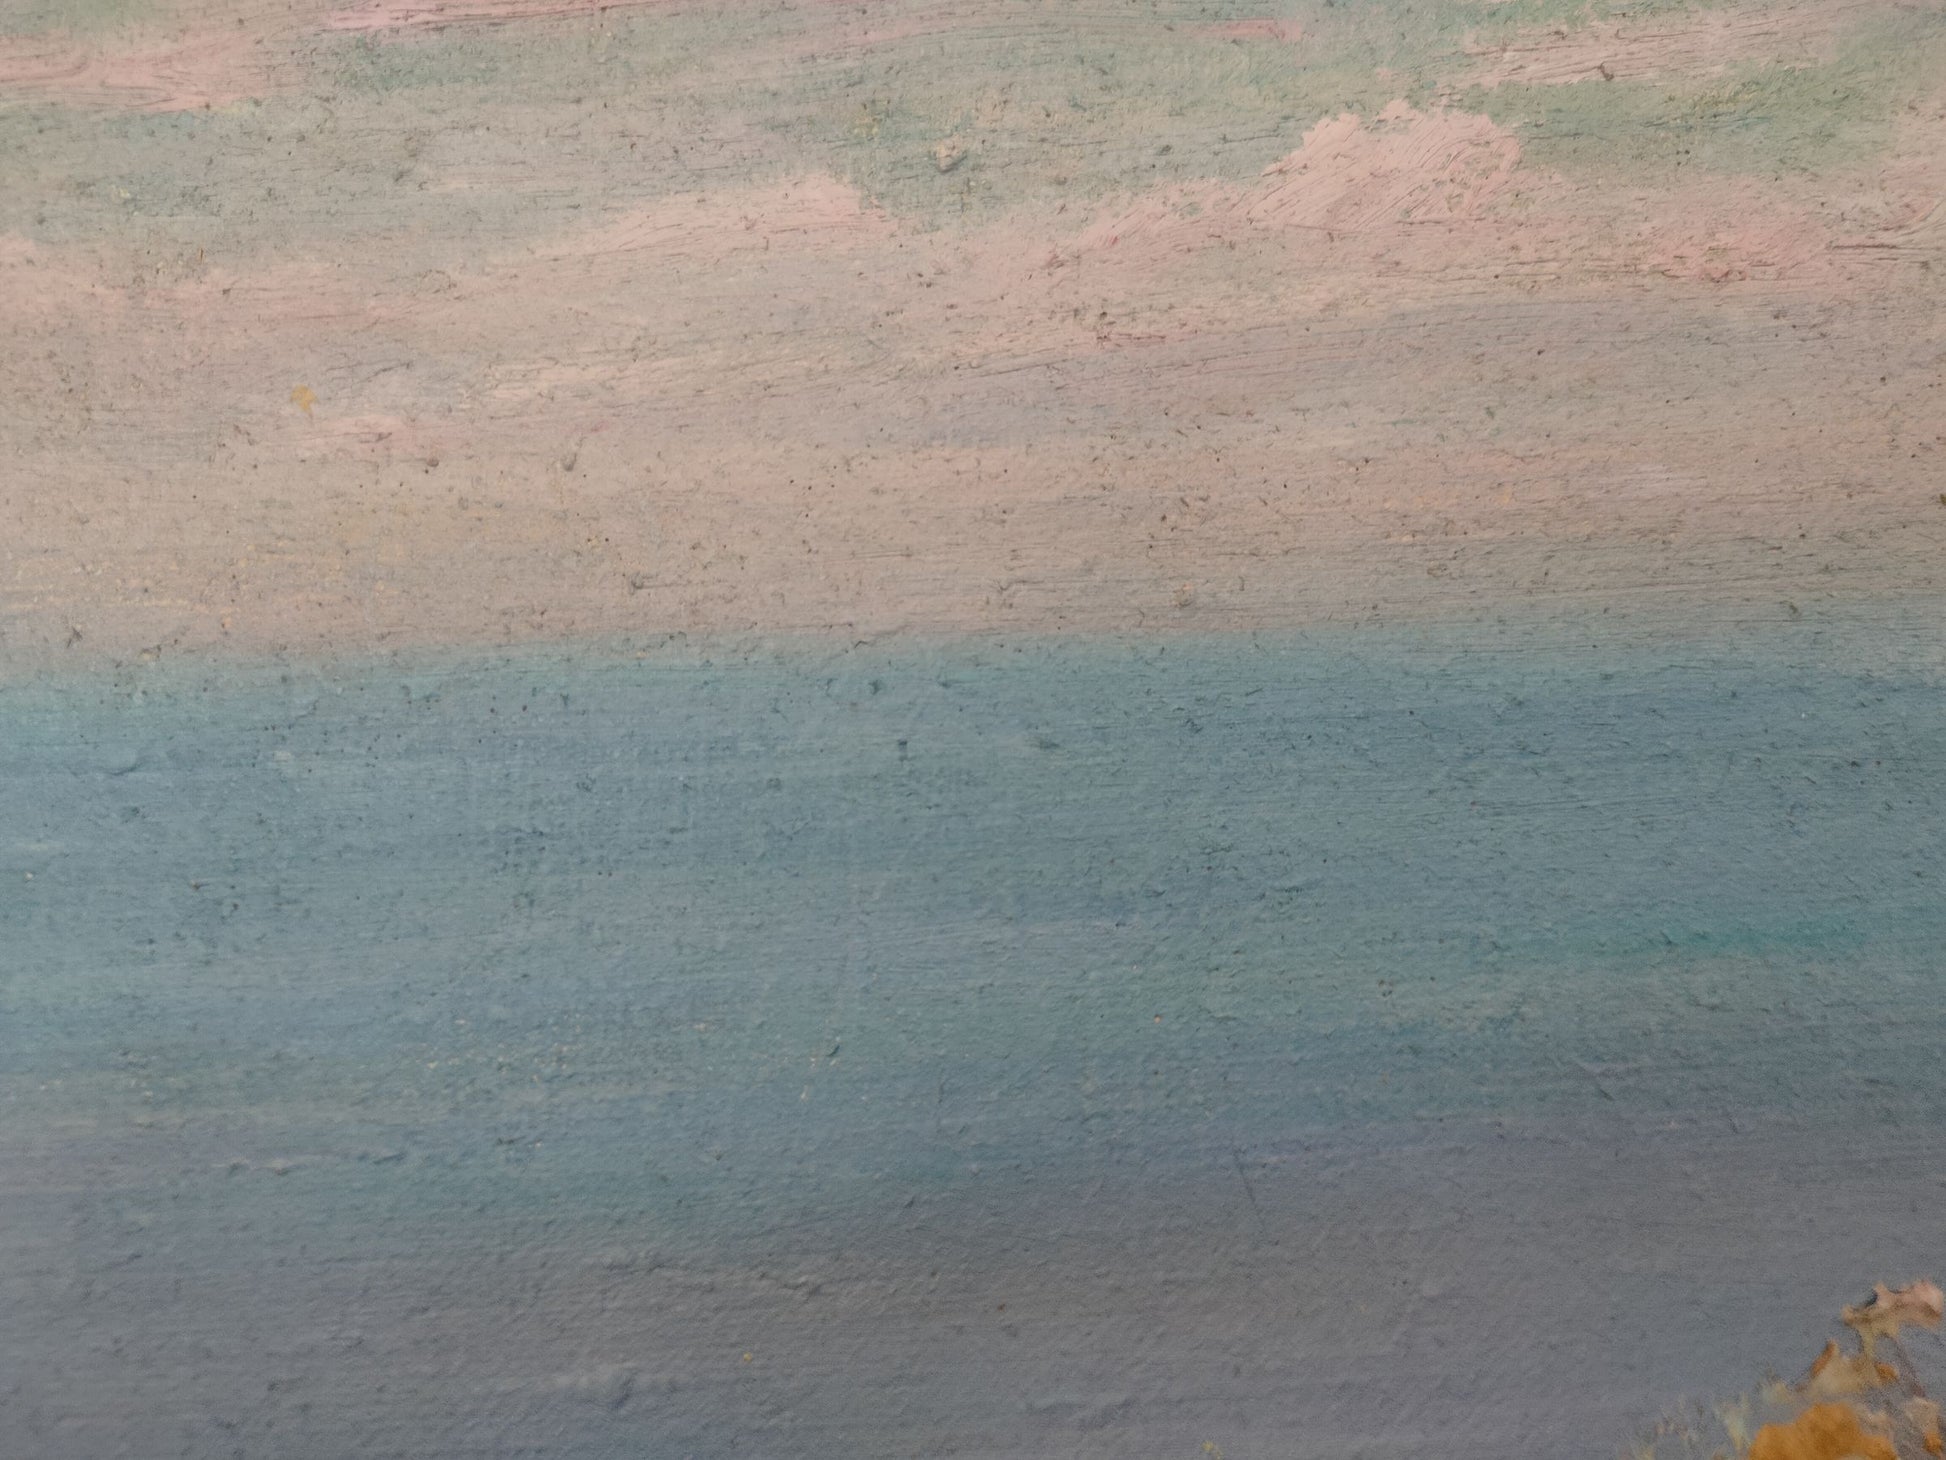 In V. V. Mishurovsky's oil painting, the sea emerges as a captivating subject